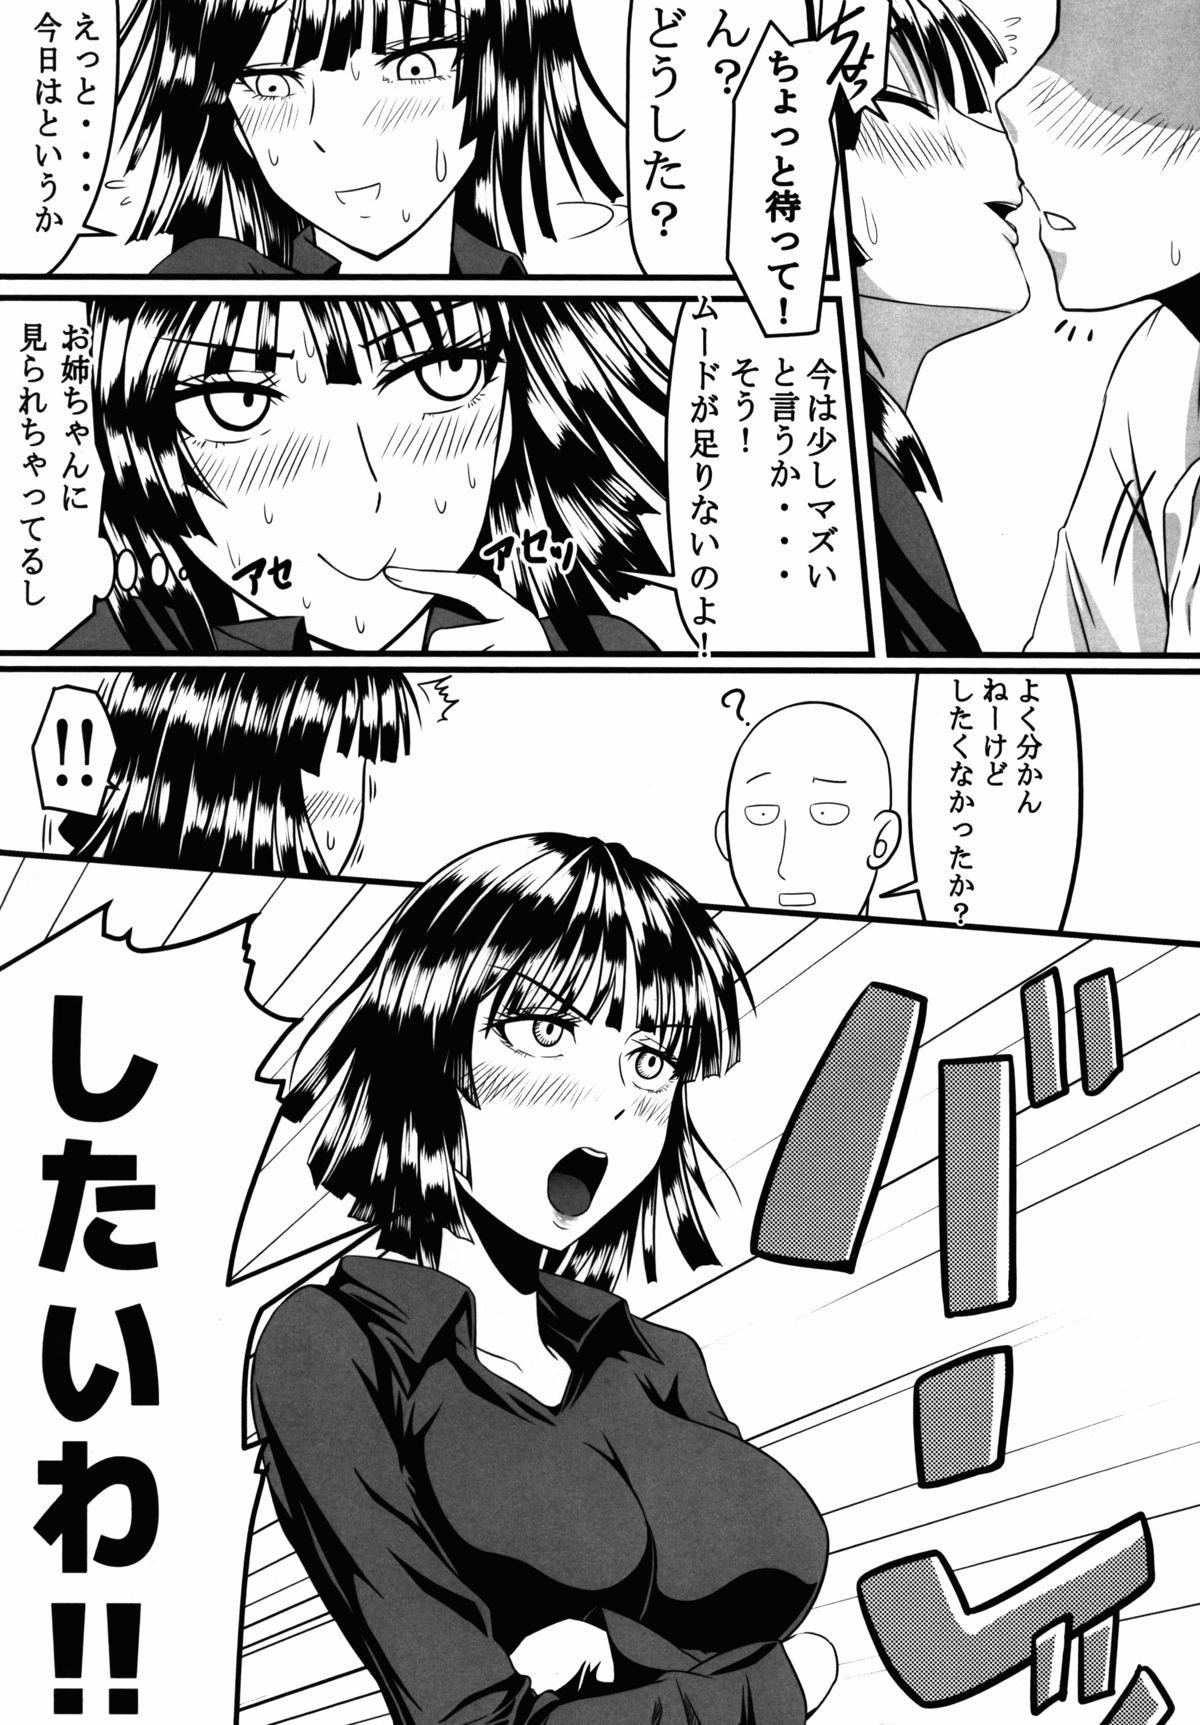 Shaved Pussy Dekoboko Love sister - One punch man Girlfriends - Page 8